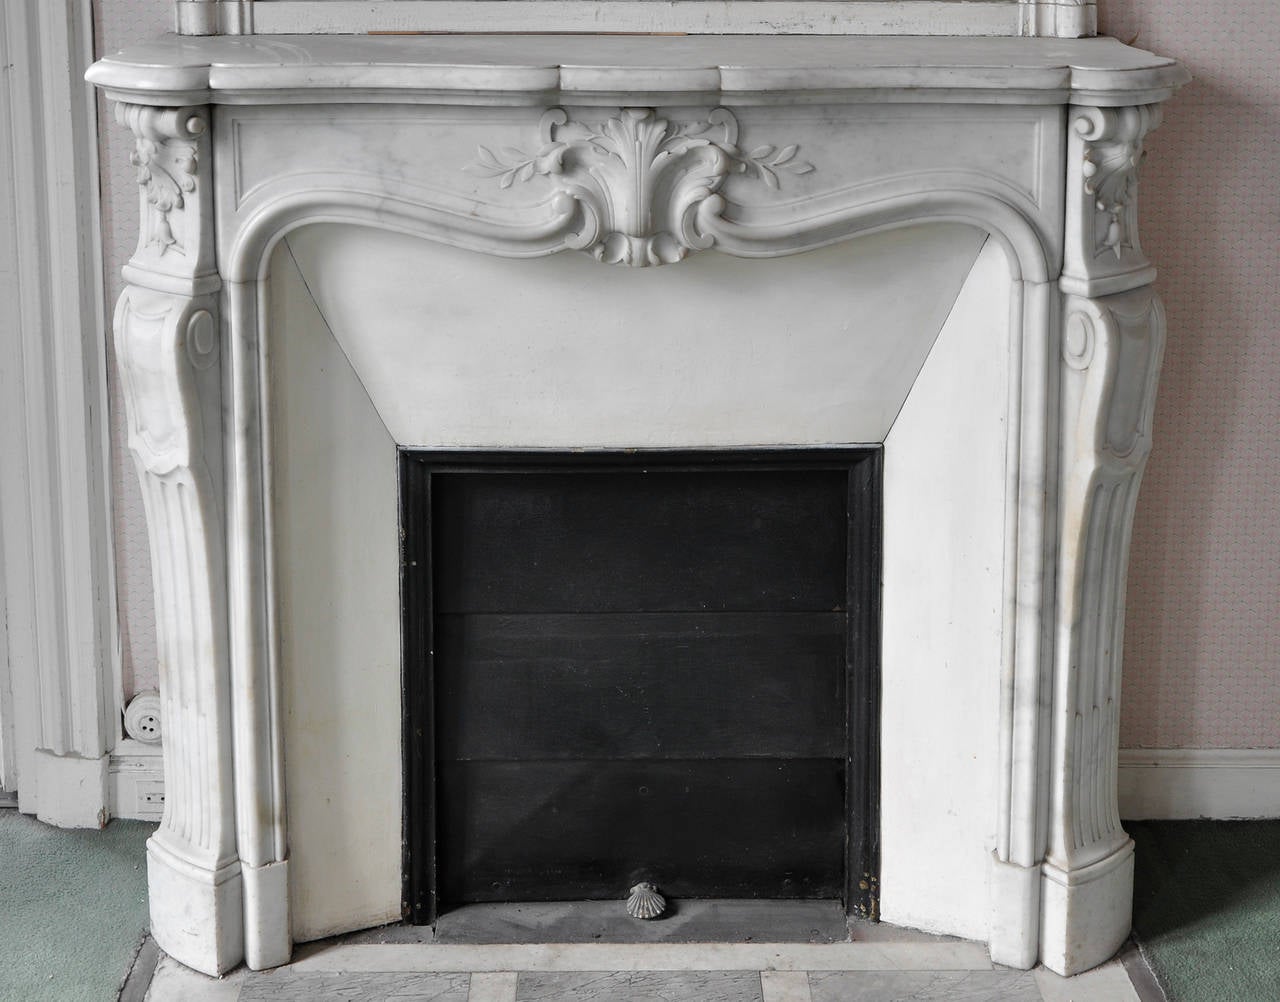 This antique Louis XV style fireplace was made out of white Carrara marble in the 19th century. 
This fireplace comes with its original enameled insert but without marble floor.